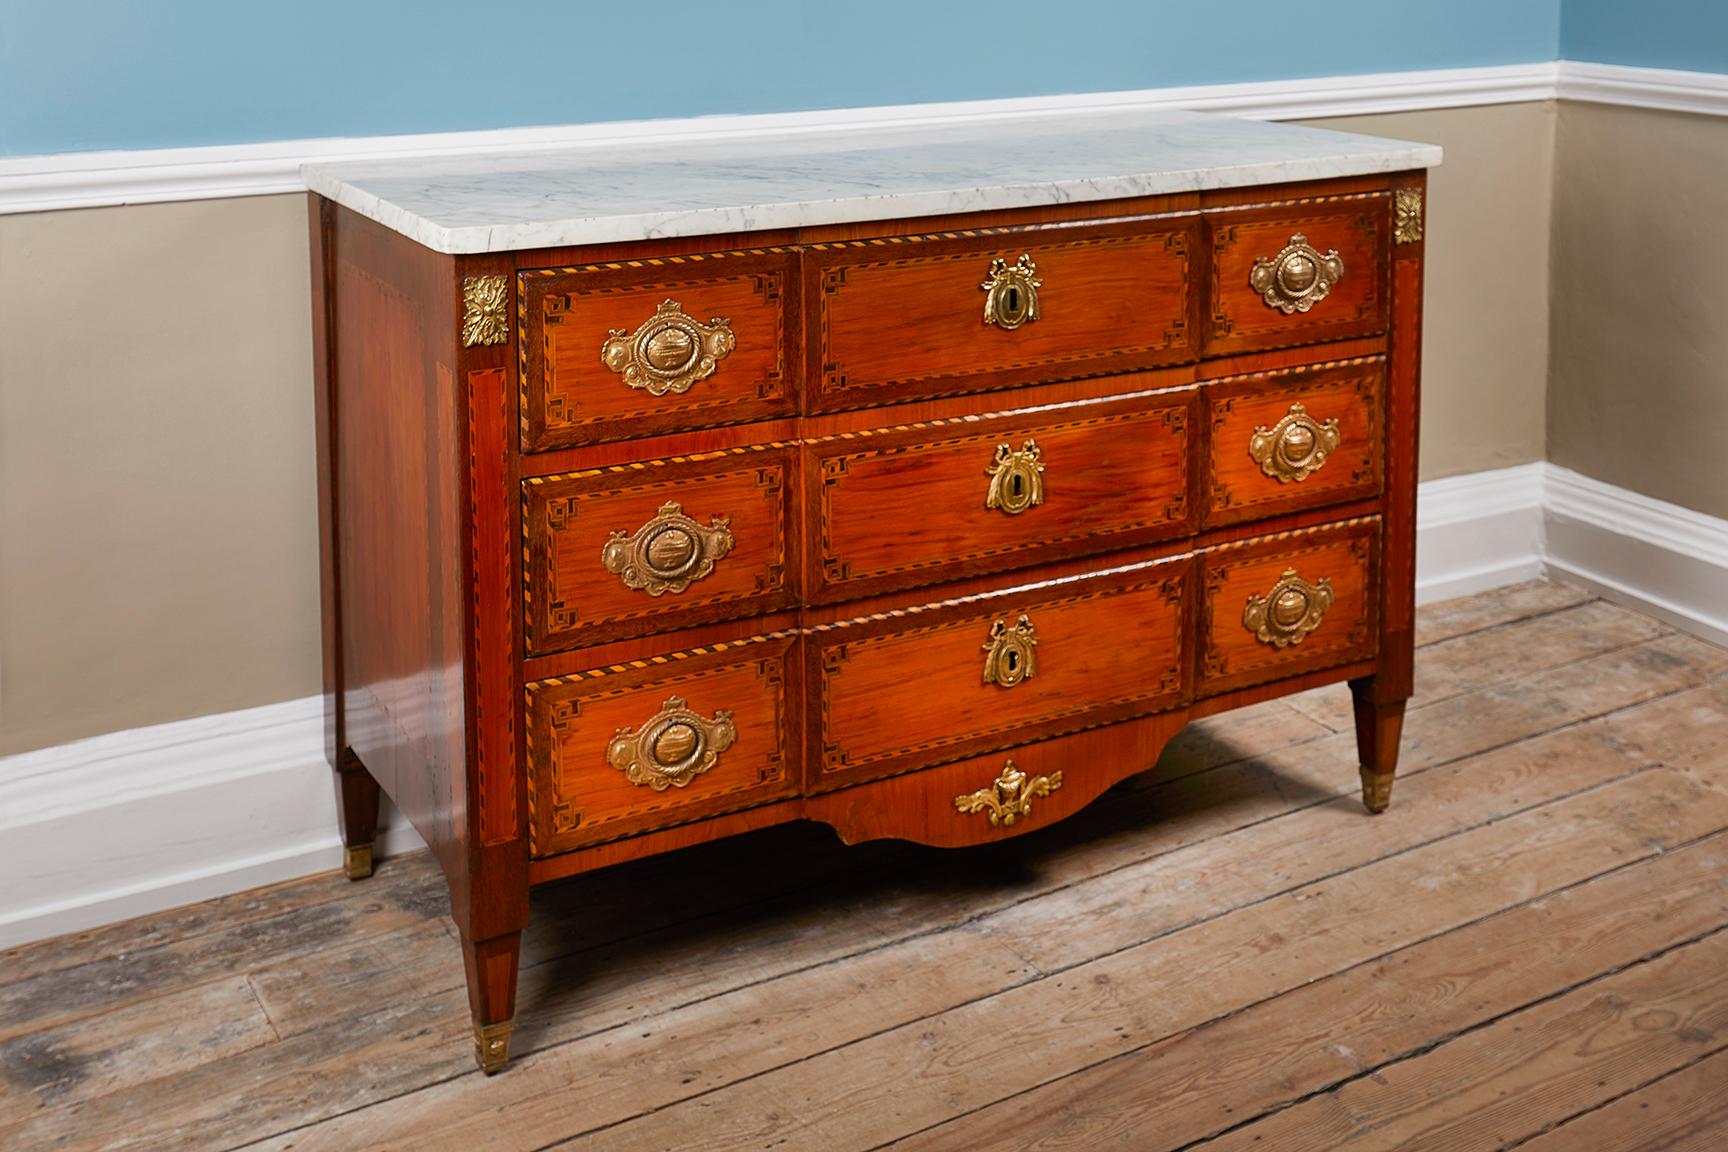 A Louis XVI style commode, 19th century, France, veneered with tulip and kingwood, the three drawers with ring-pull handles and escutcheons, with ebony and boxwood stripes, on tapered legs capped with brass feet, with marble top.